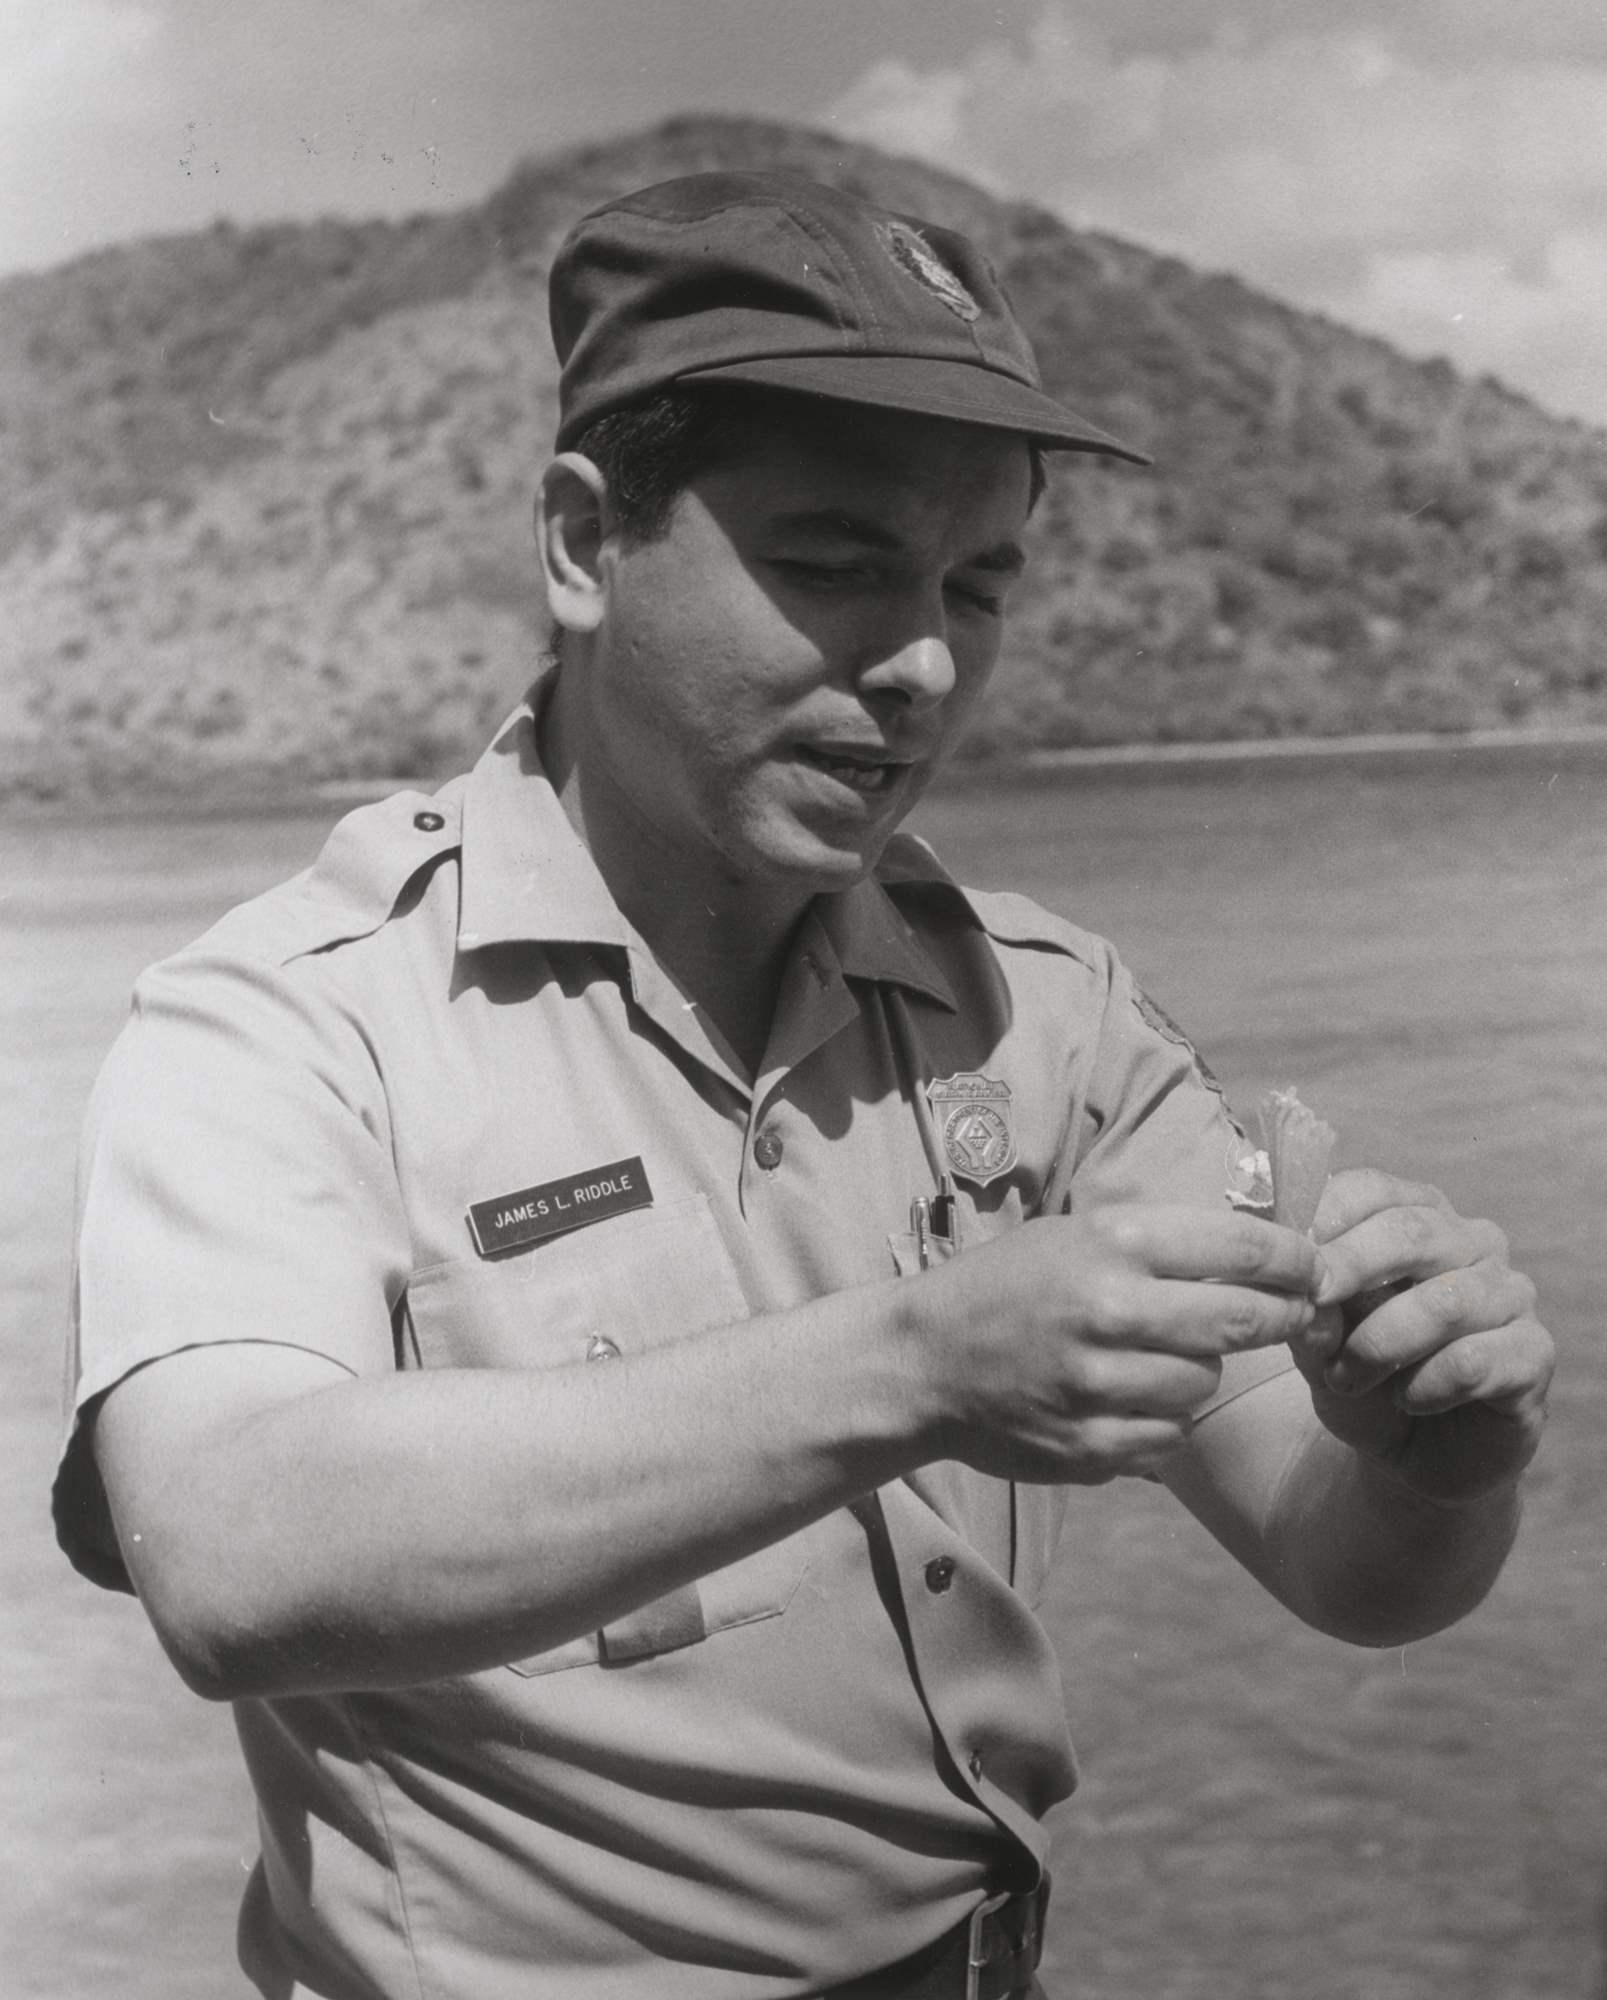 James Riddle in NPS uniform with ball cap wears a shield-shaped badge featuring stylized hands.